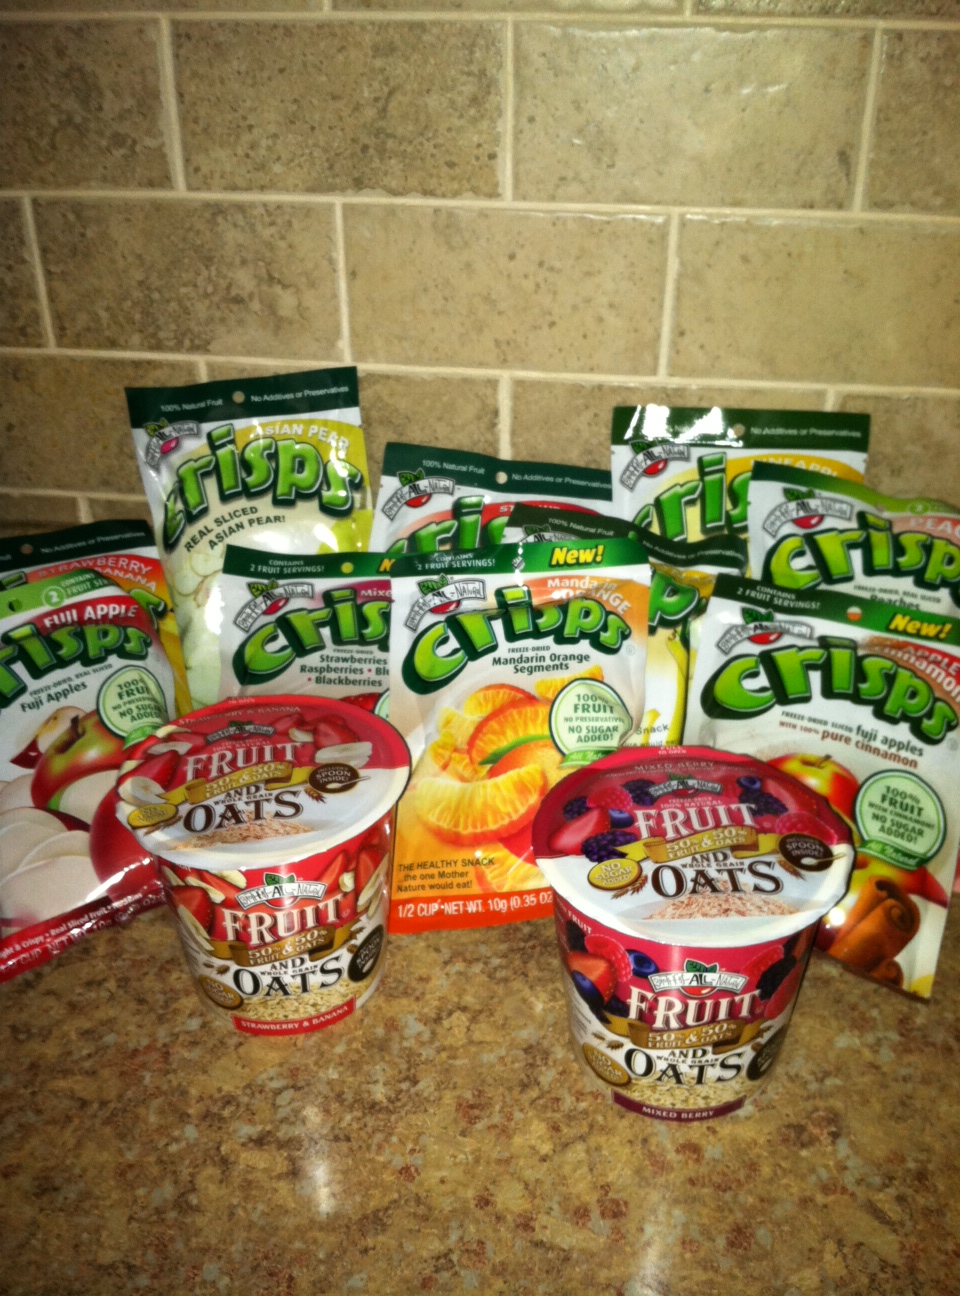 A sampling of the healthy snack products from Brothers-All-Natural